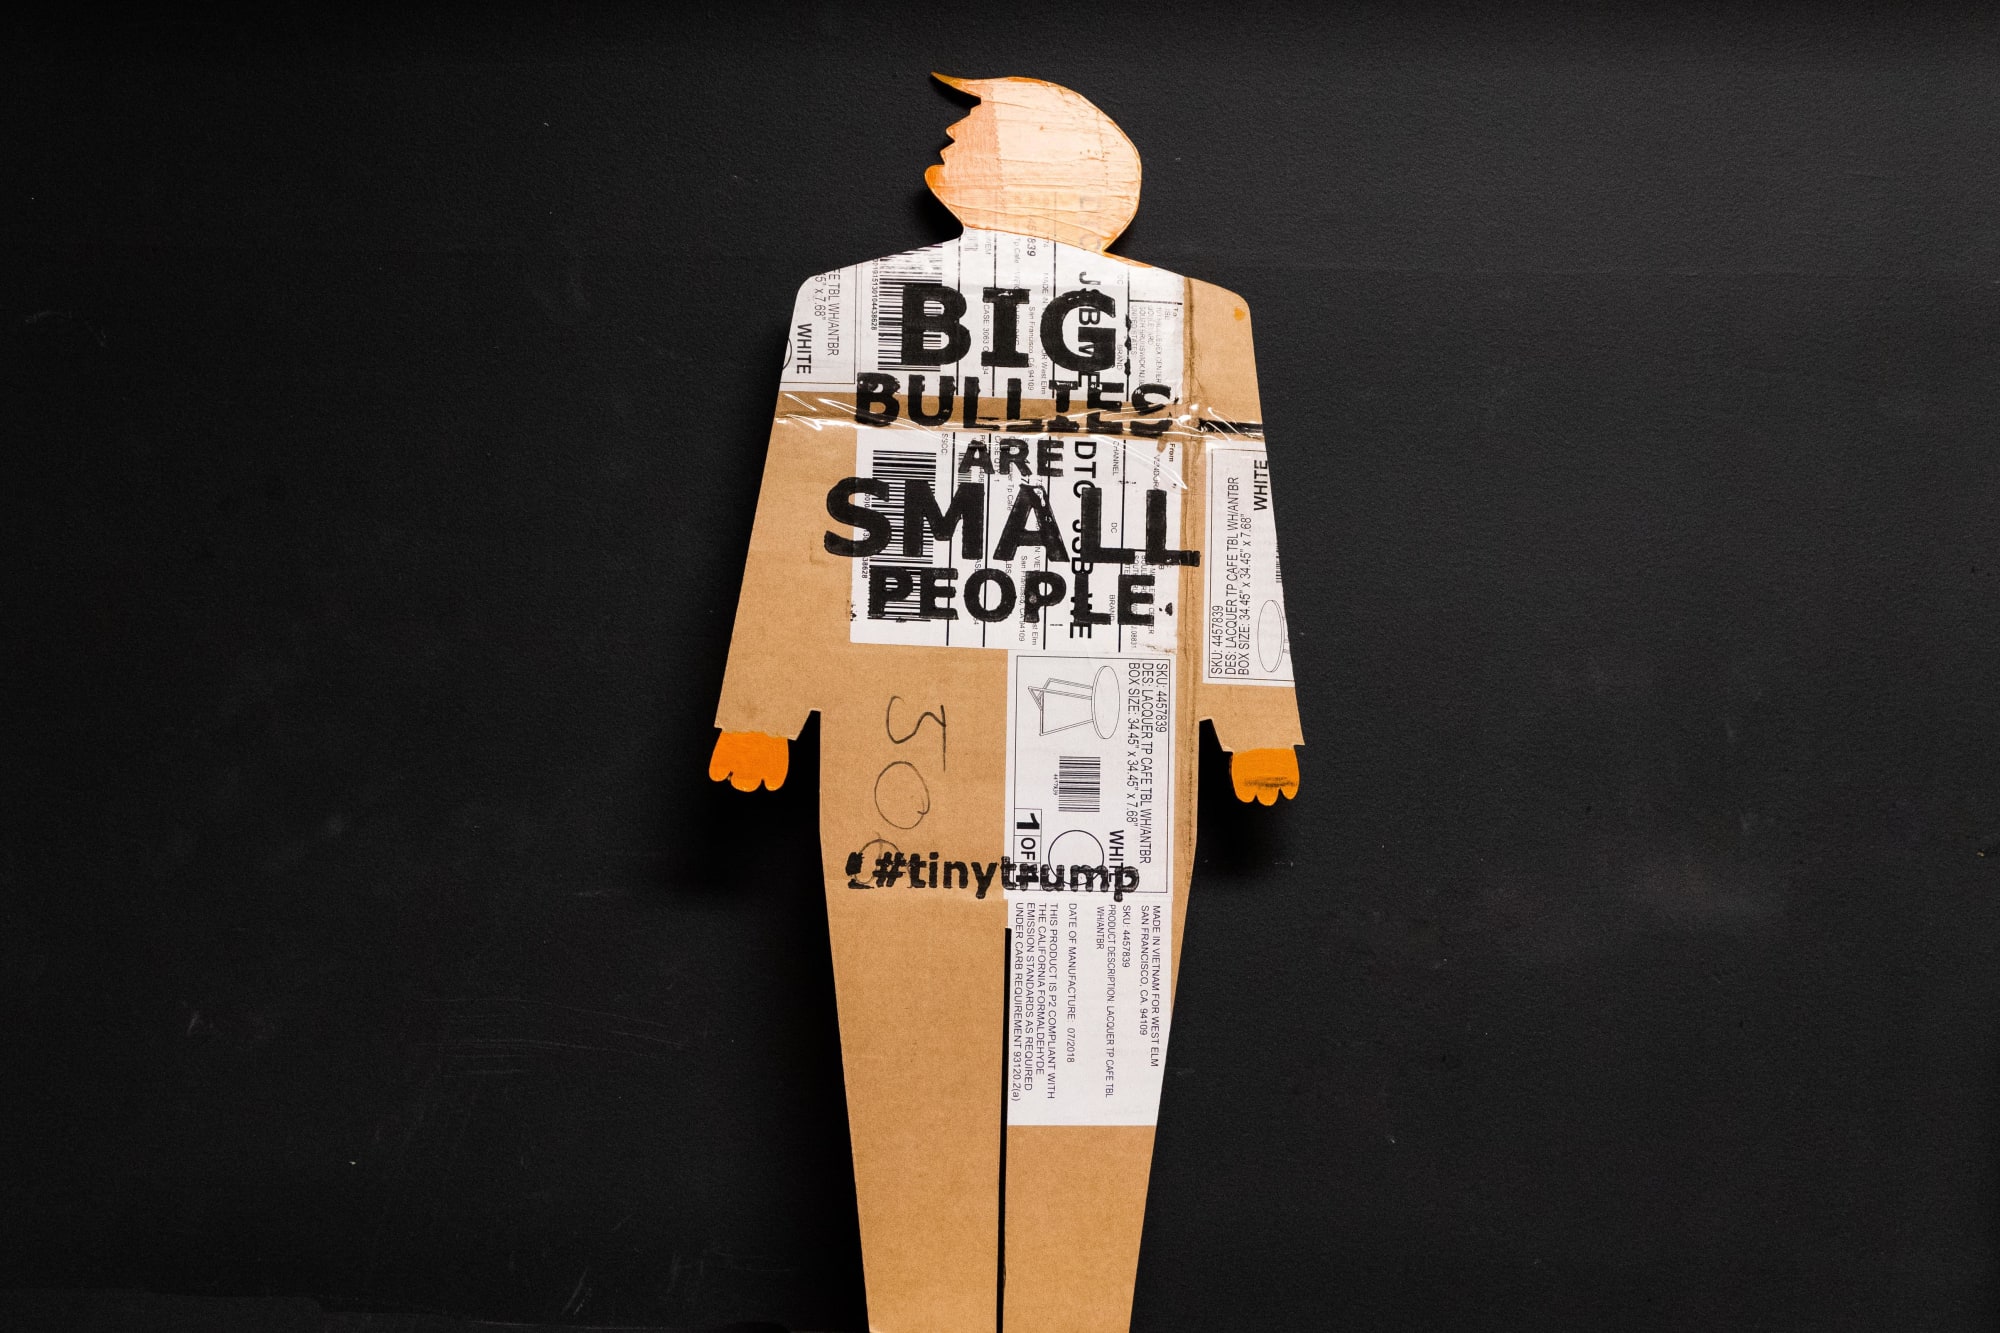 Two foot tall caricature cardboard cut out of trump with clown like hands and swooshy hair. Head and hands are painted bright orange and the slogan Big Bullies Are Small People is stamped in black ink across the chest. The cardboard is clearly used—it has shipping labels on it. Gray photo studio background.